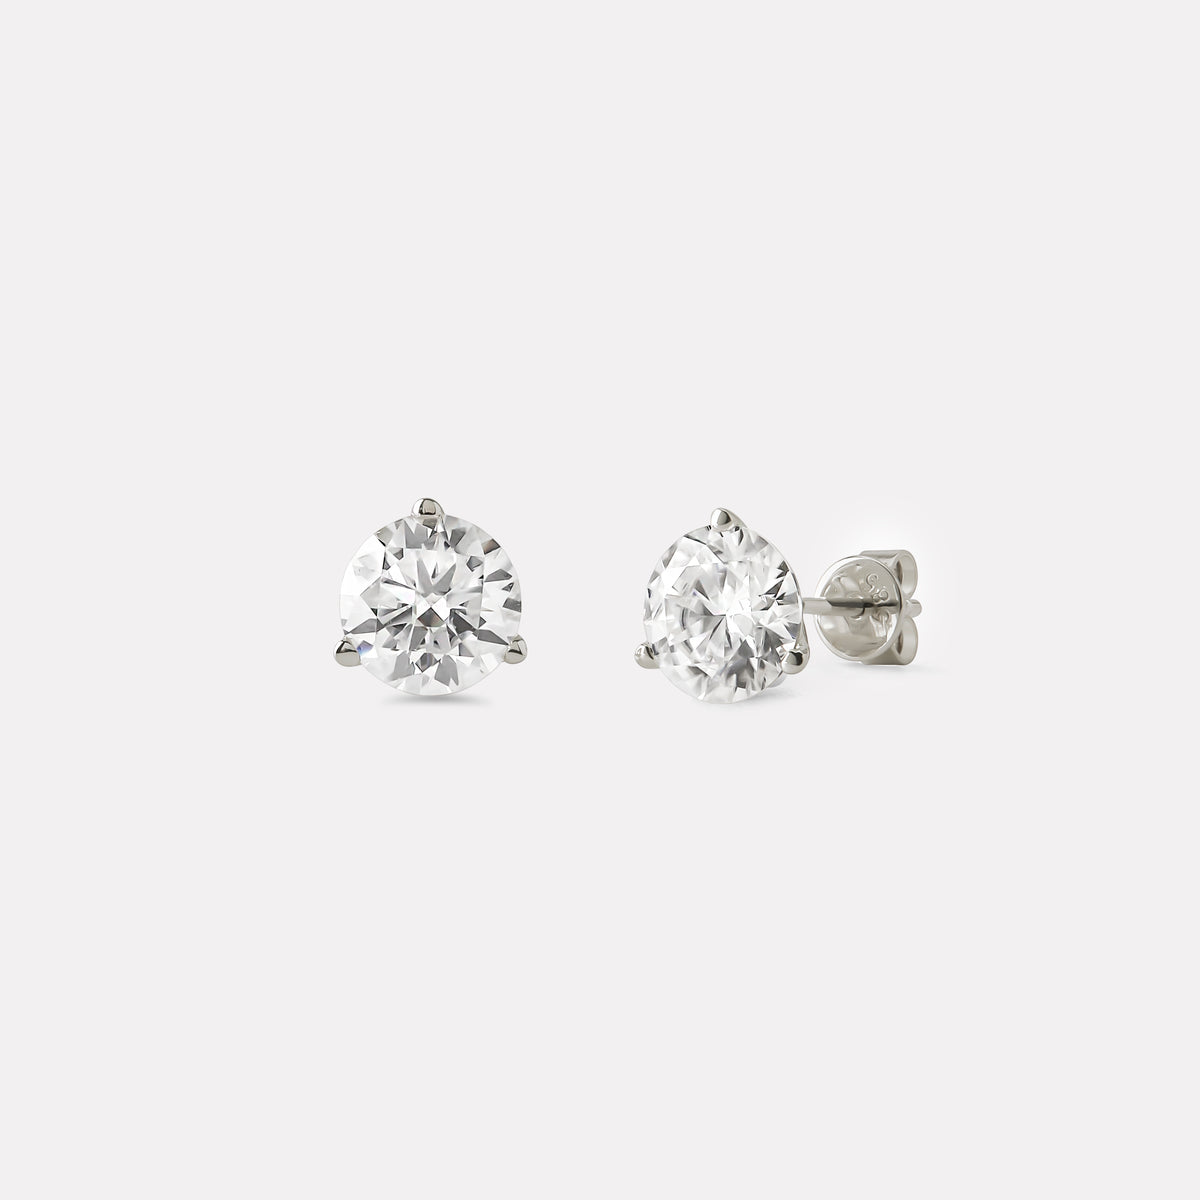 Round Brilliant Solitaire Earrings in Martini Setting